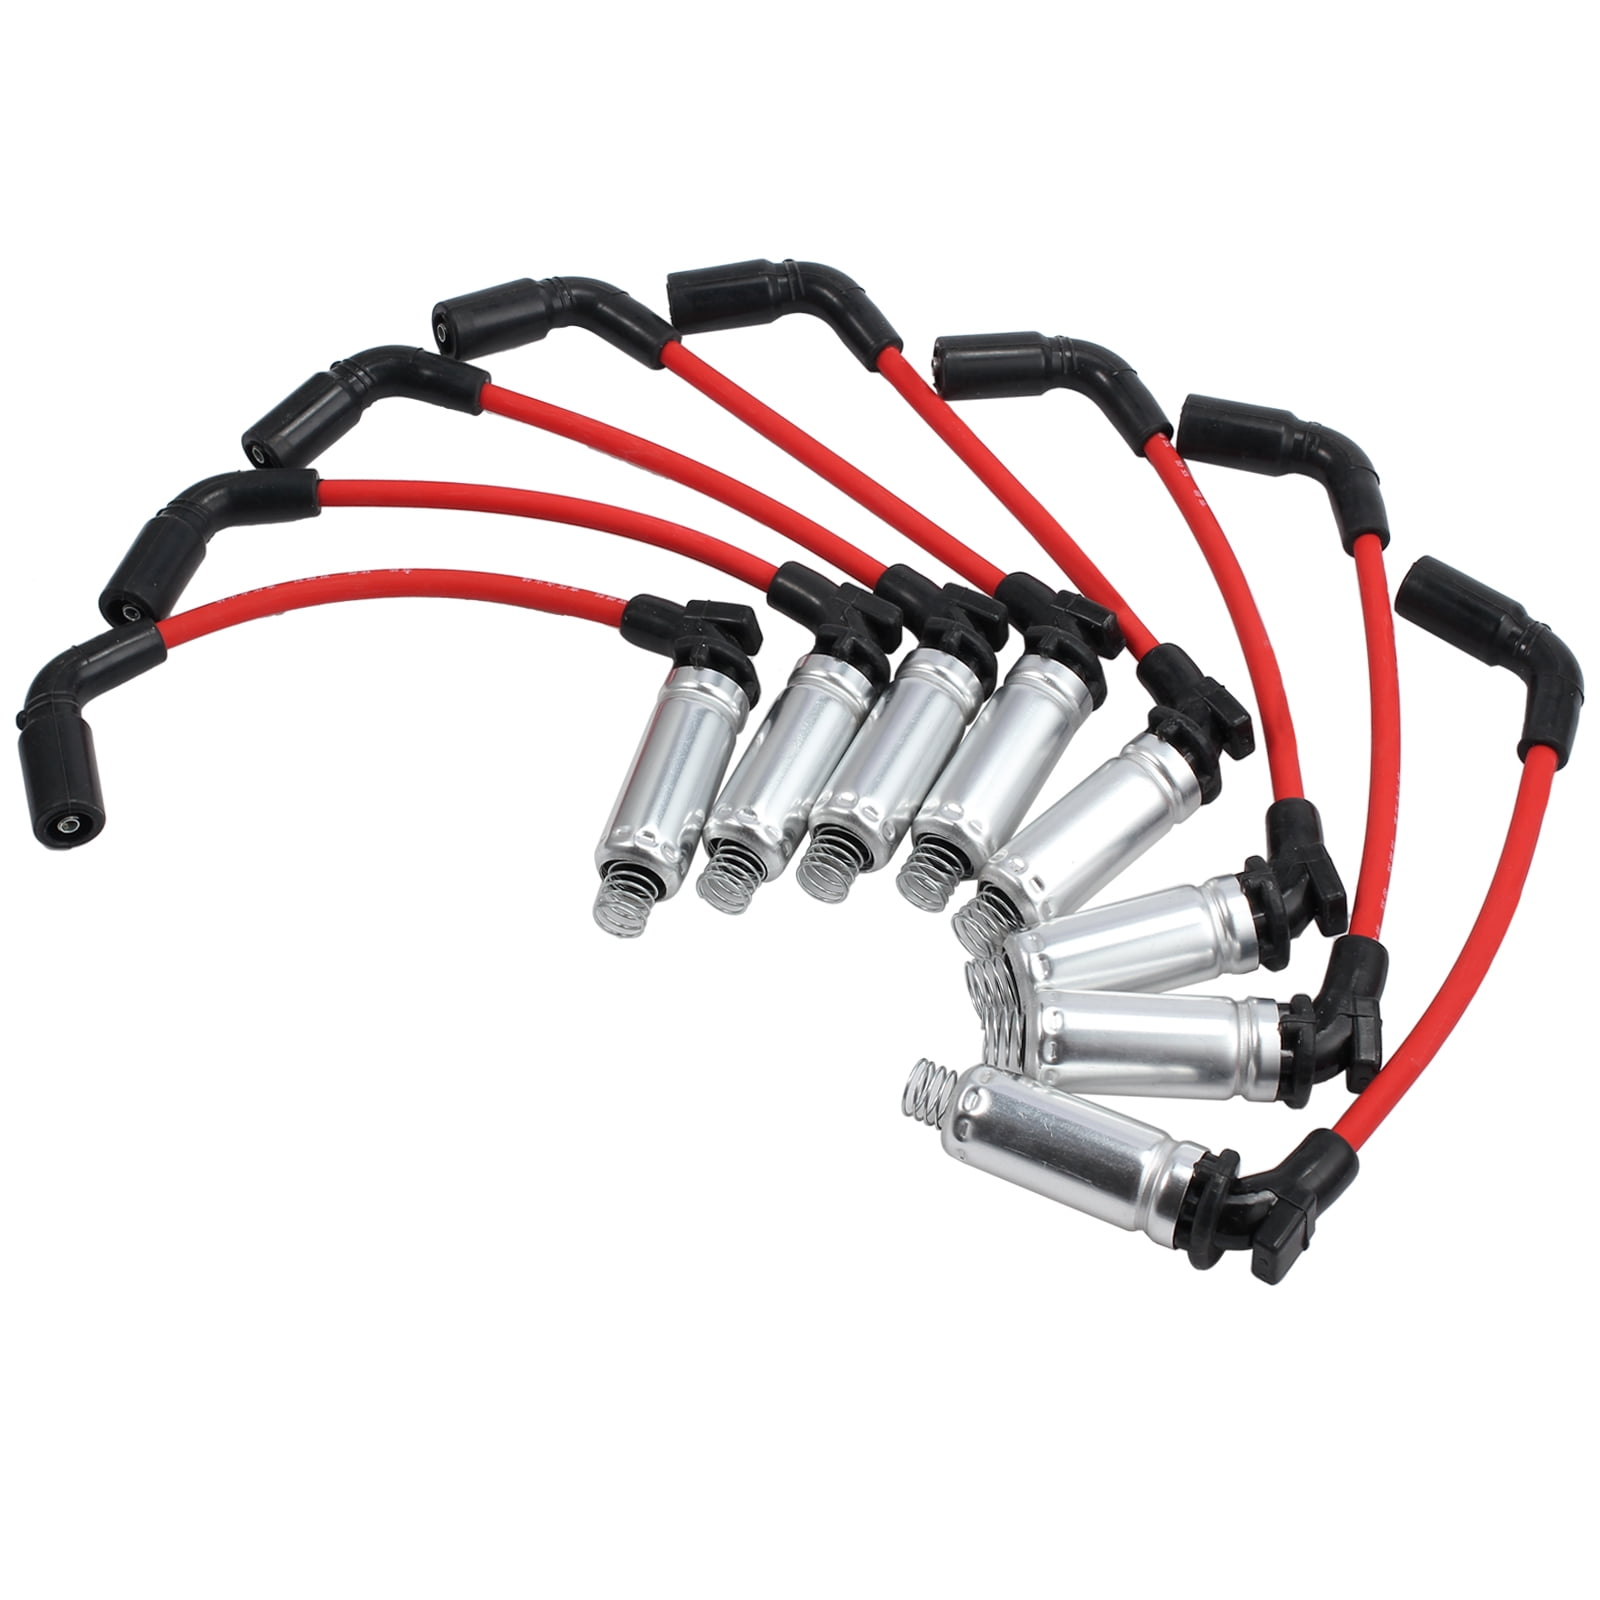 ESYNIC 8PCS Spark Plug Ignition Wires Racing RED Set For 2000-2009 Chevrolet Silverado - Walmart Plugs And Wires For 2000 Chevy Silverado